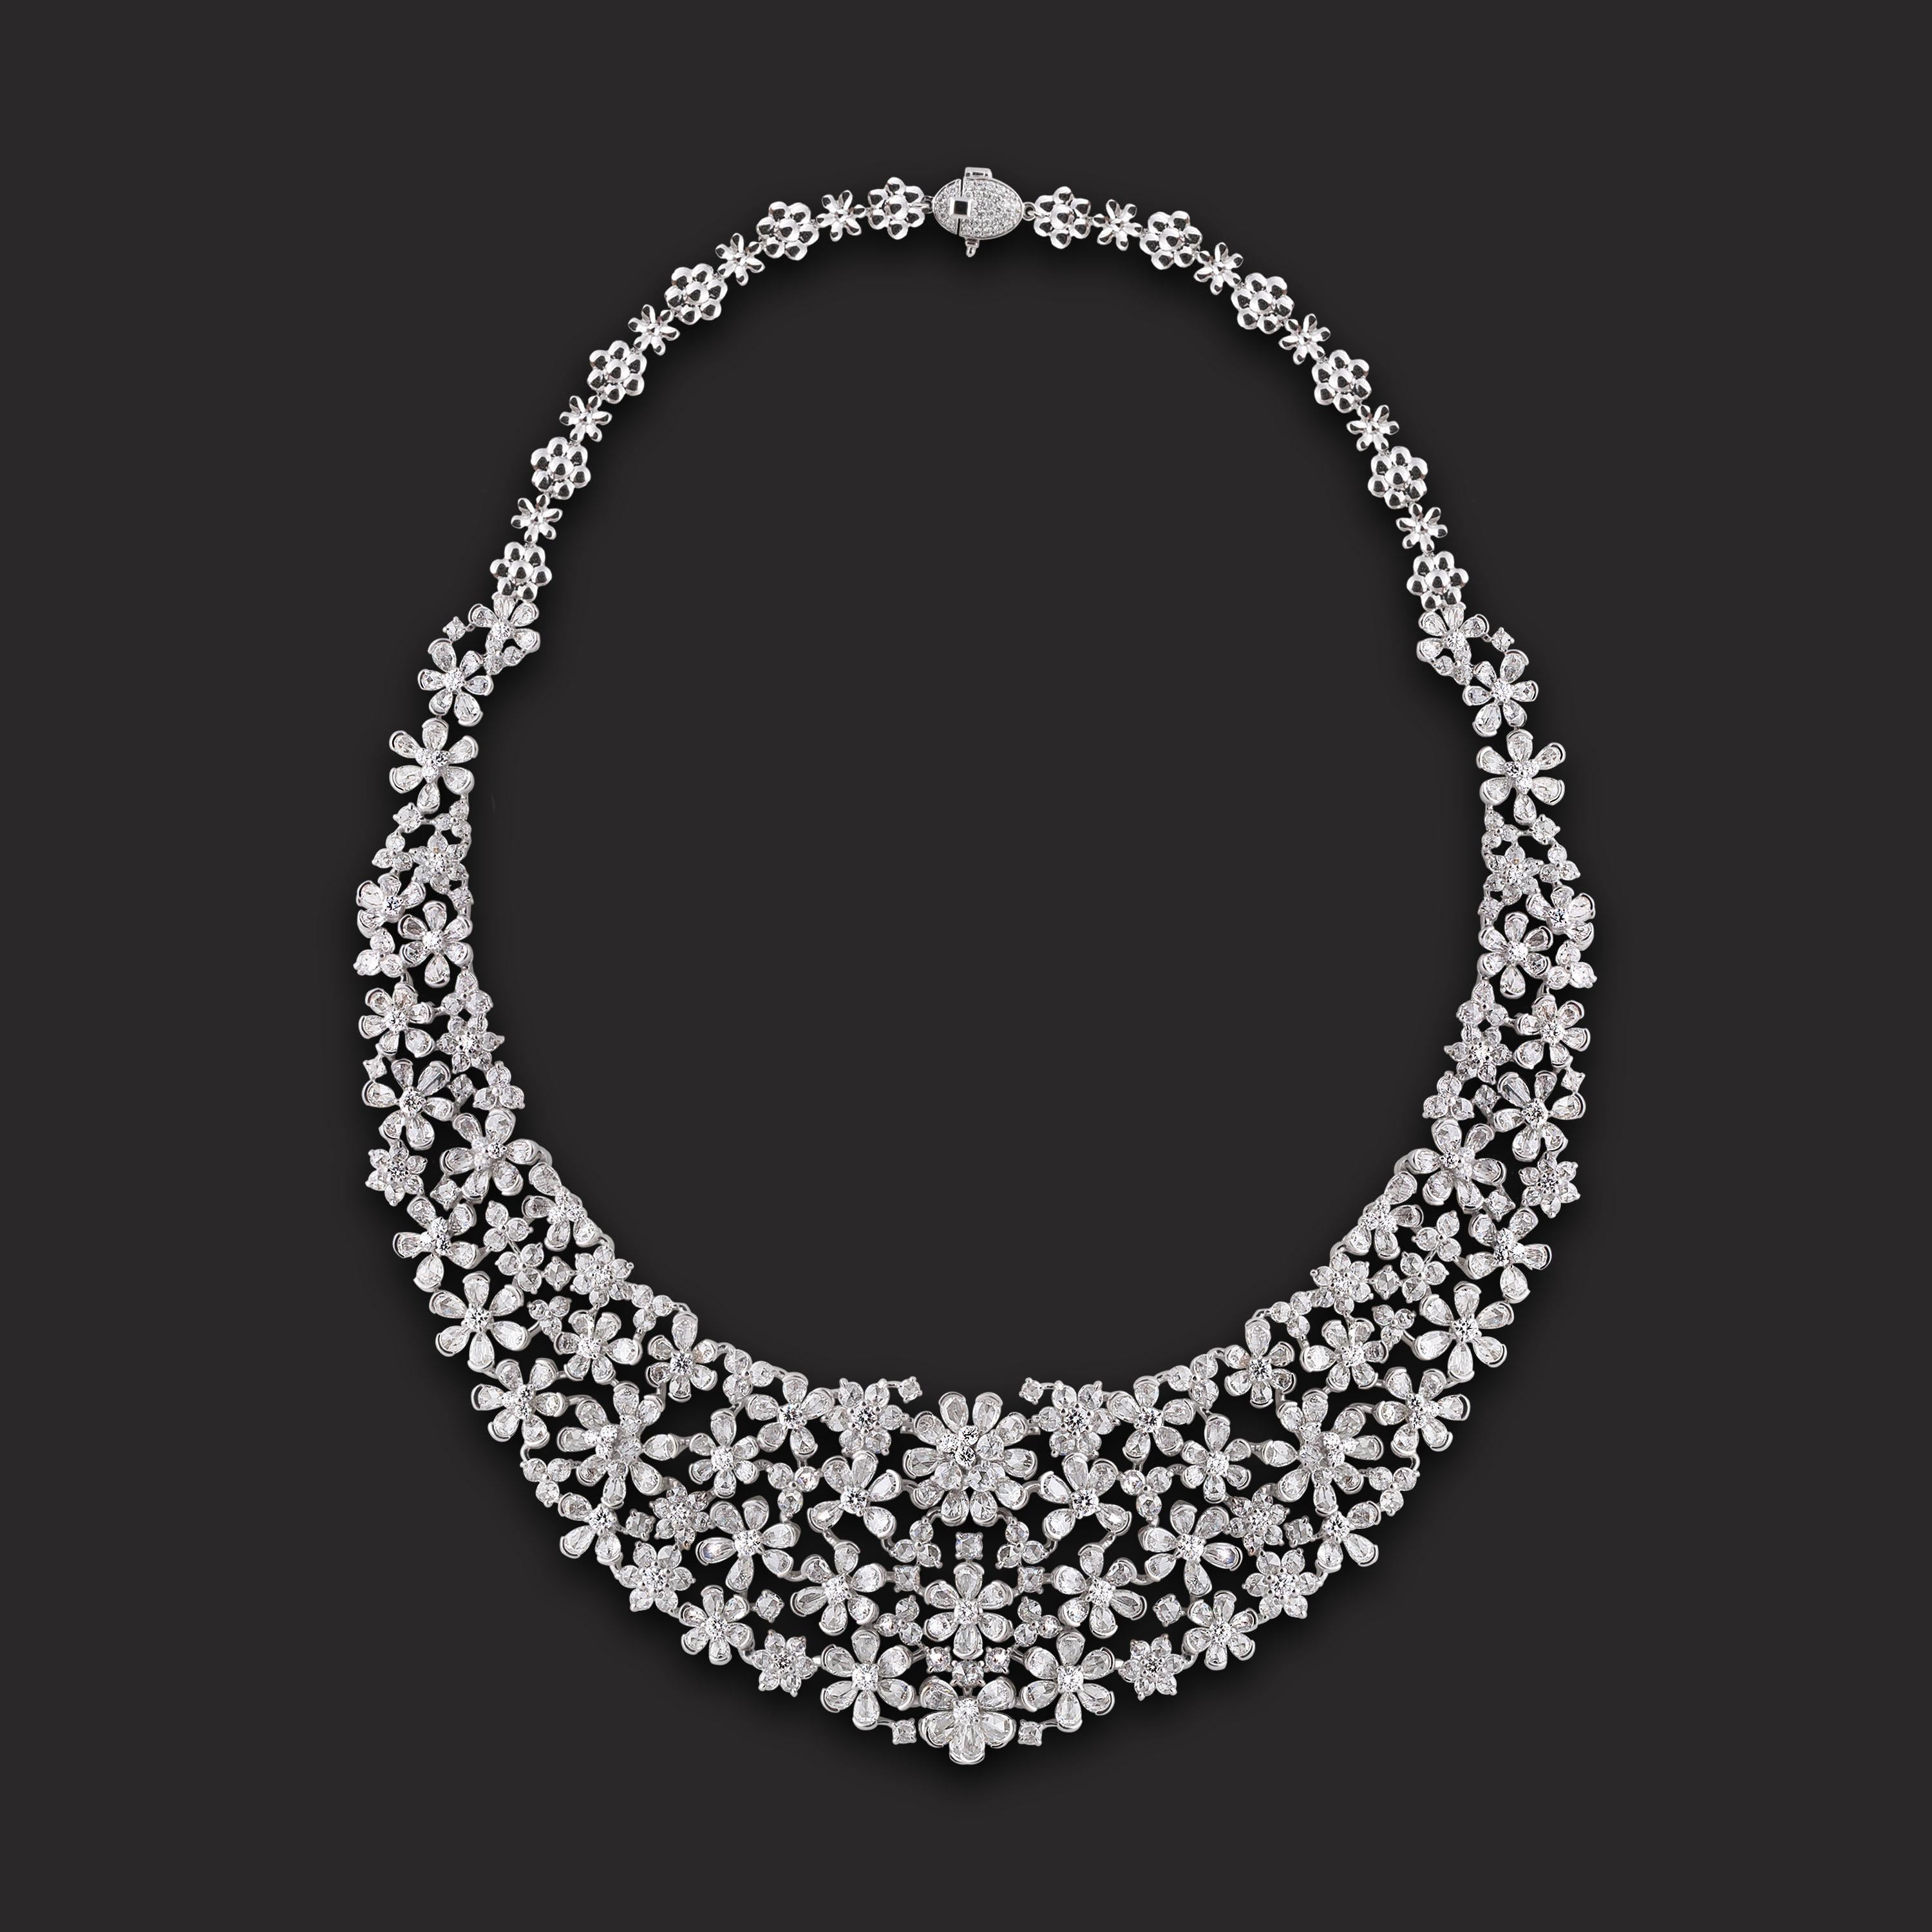 Studio Rêves Diamond Floral Necklace in 18 Karat Gold In New Condition For Sale In Mumbai, Maharashtra